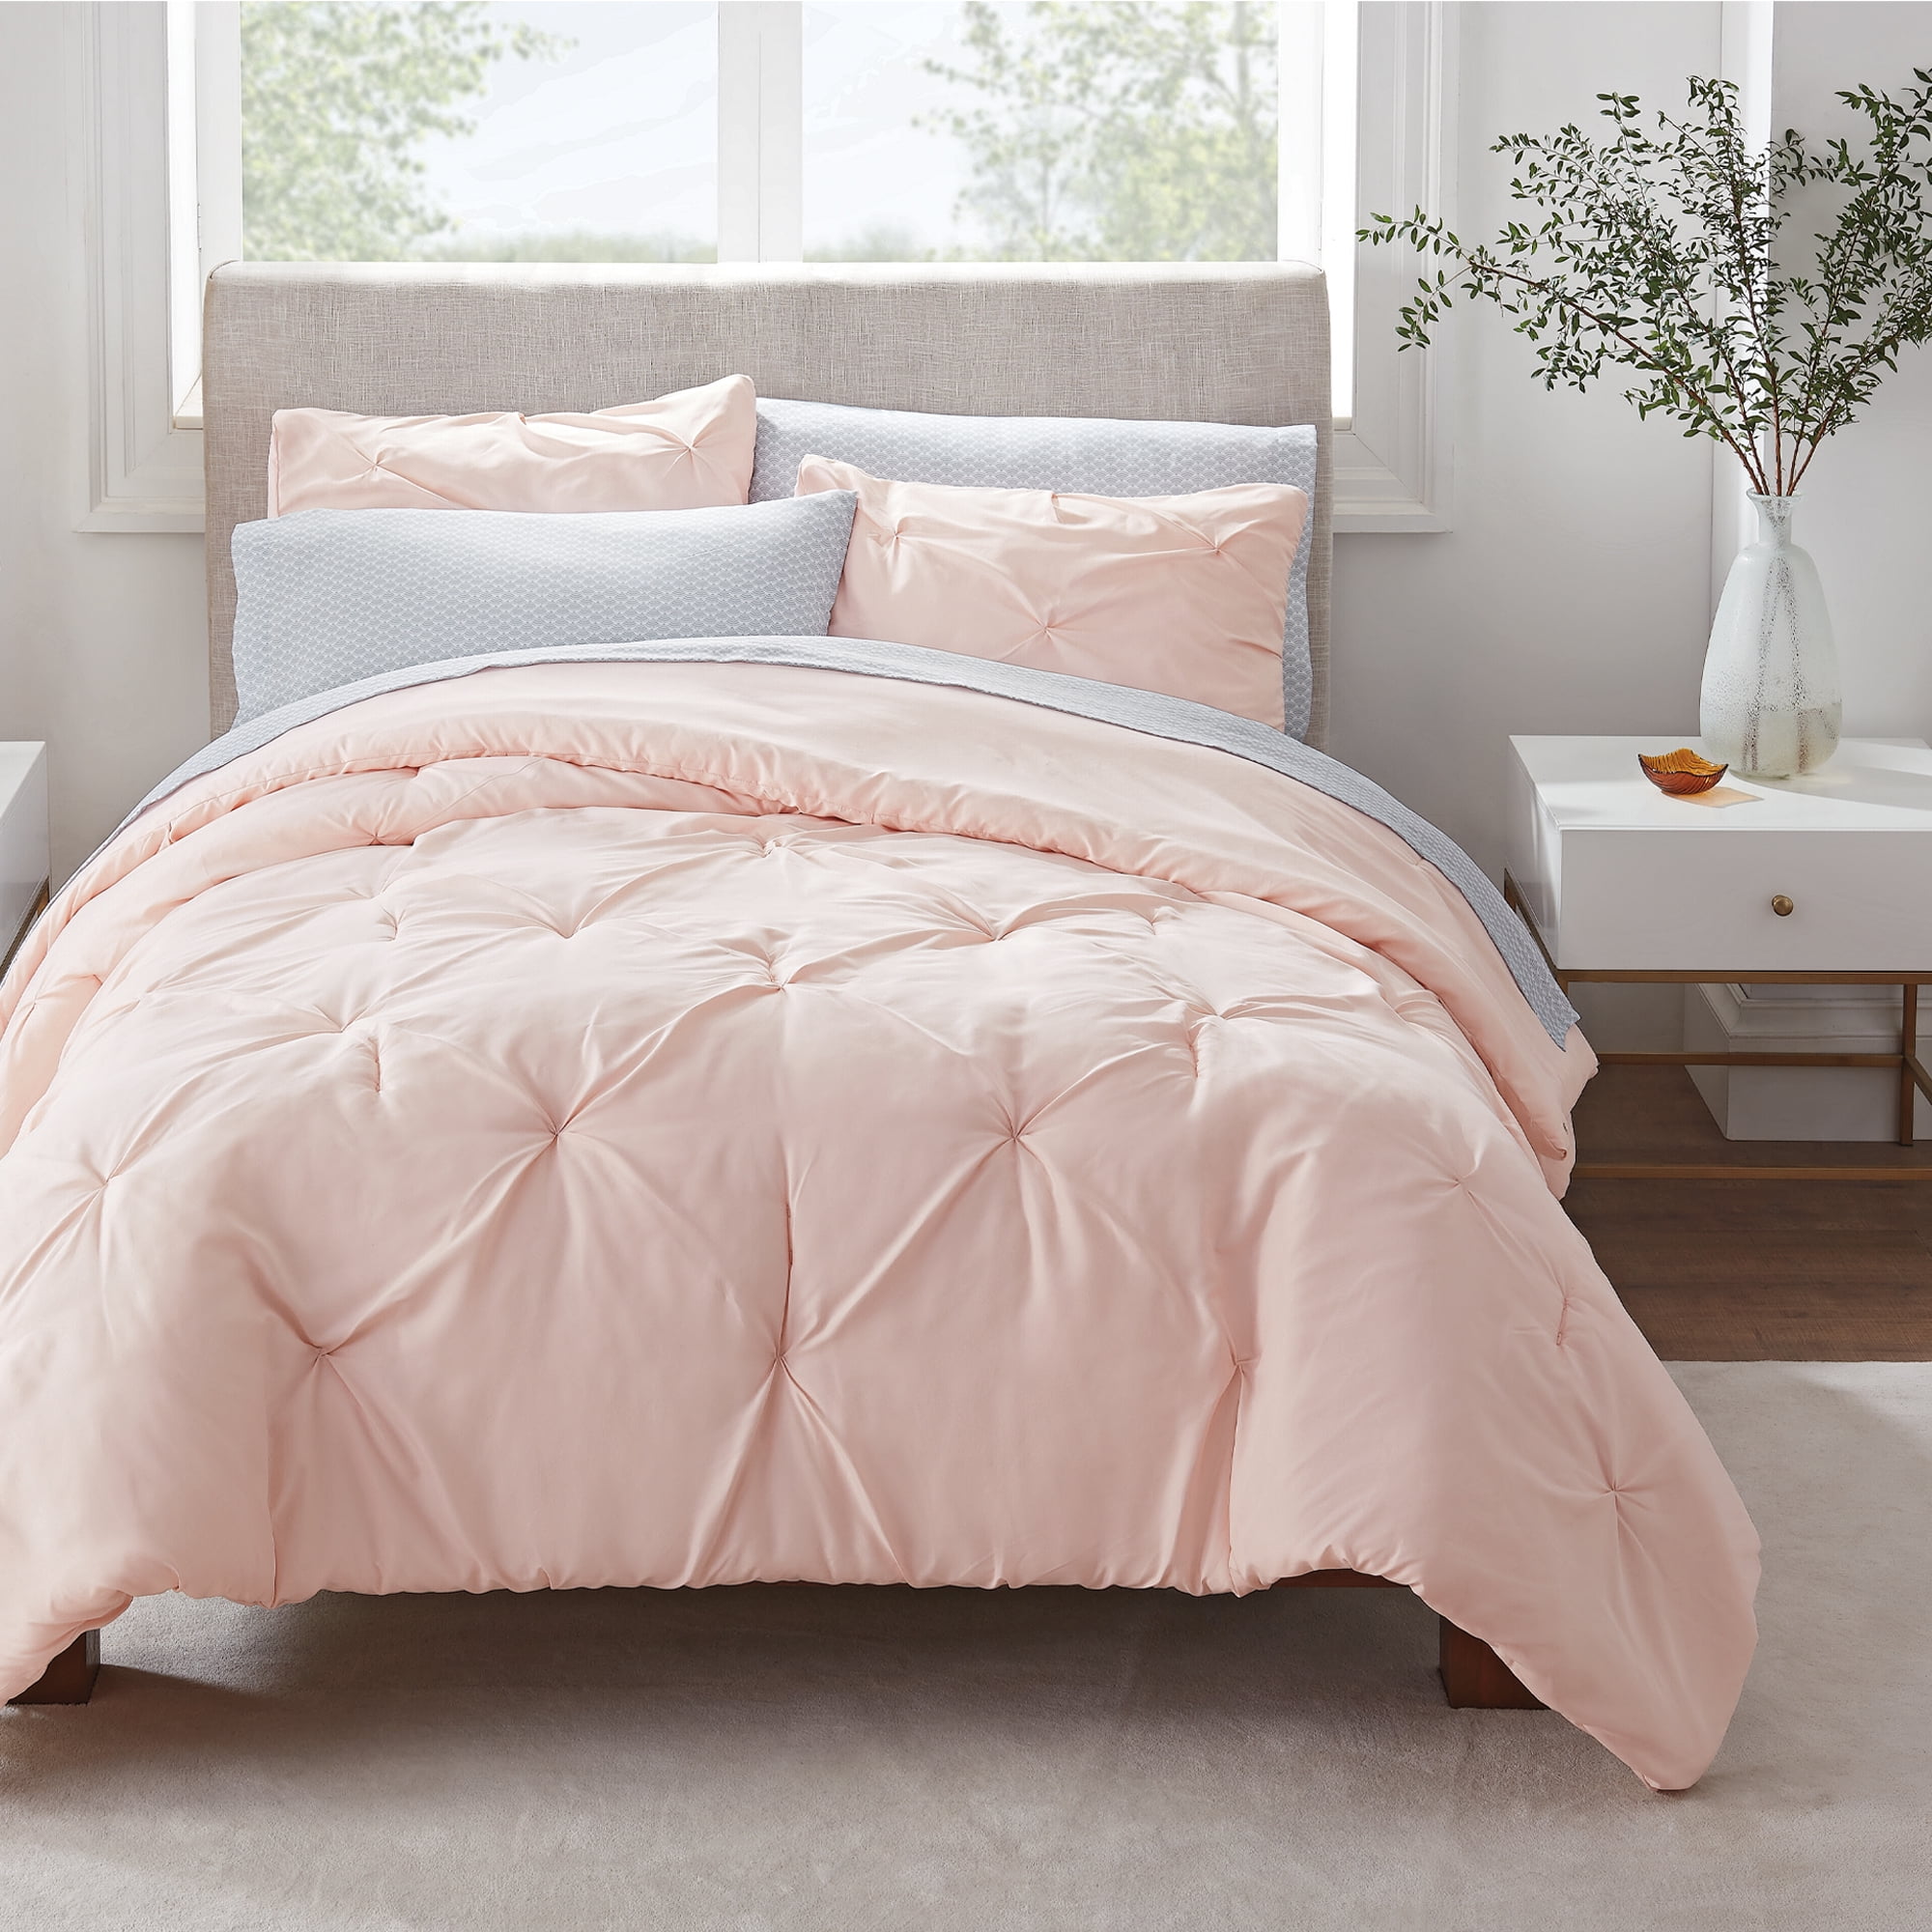 Serta Simply Clean in a Bag Solid Pleated Blush Pink, King, 7-Piece - Walmart.com